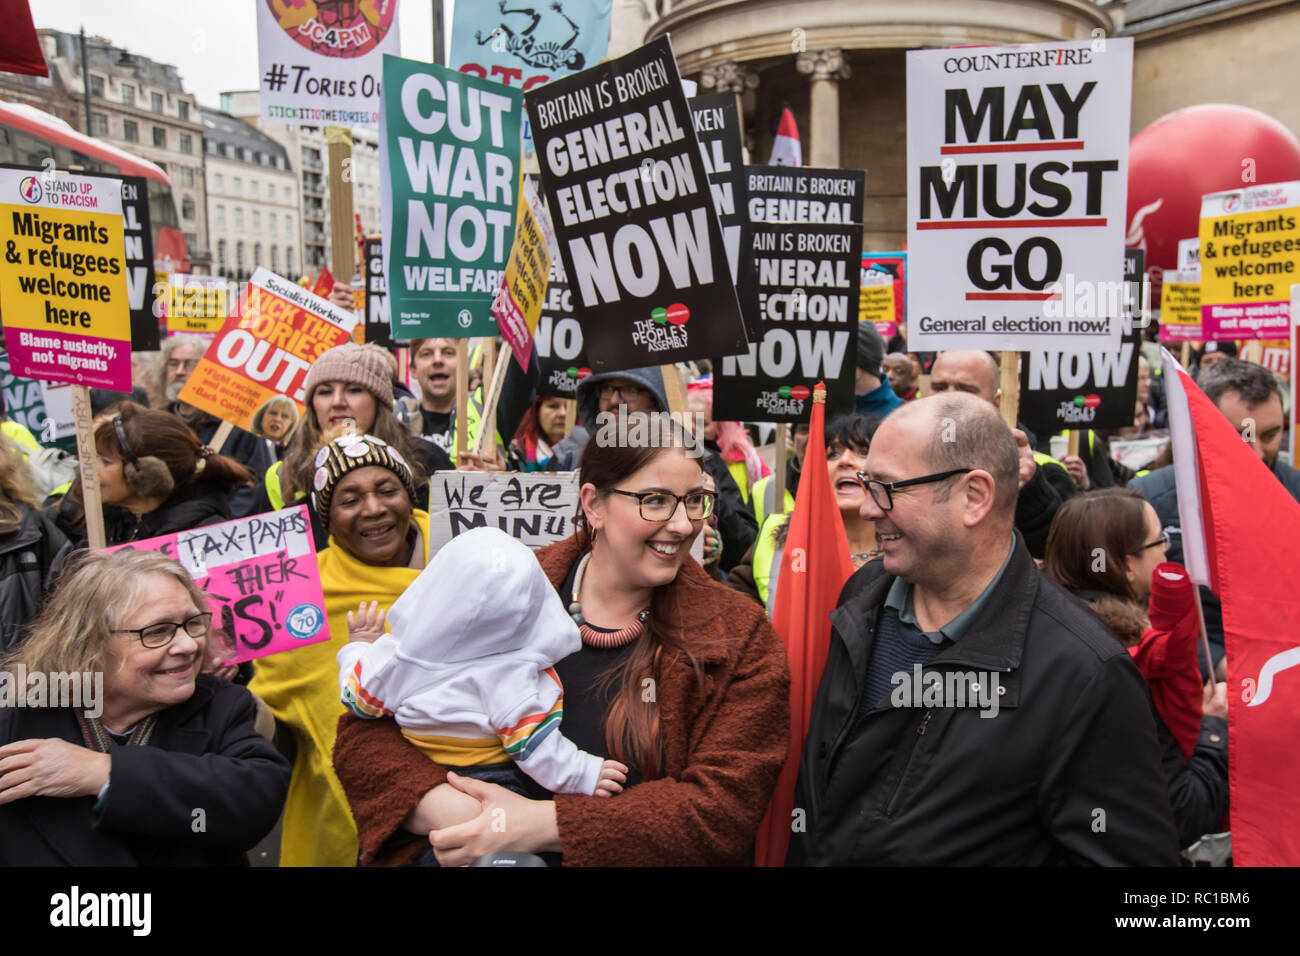 London,UK. 12 January, 2019. L-R: Lindsey German of Stop the War Coalition, Labour MP Laura Pidcock (with baby) and Steve Turner, Assistant General Secretary of Unite the Union at the head of the ‘Britain is broken’ march were thousands marched to call for a General Election. David Rowe/Alamy Live News. Stock Photo